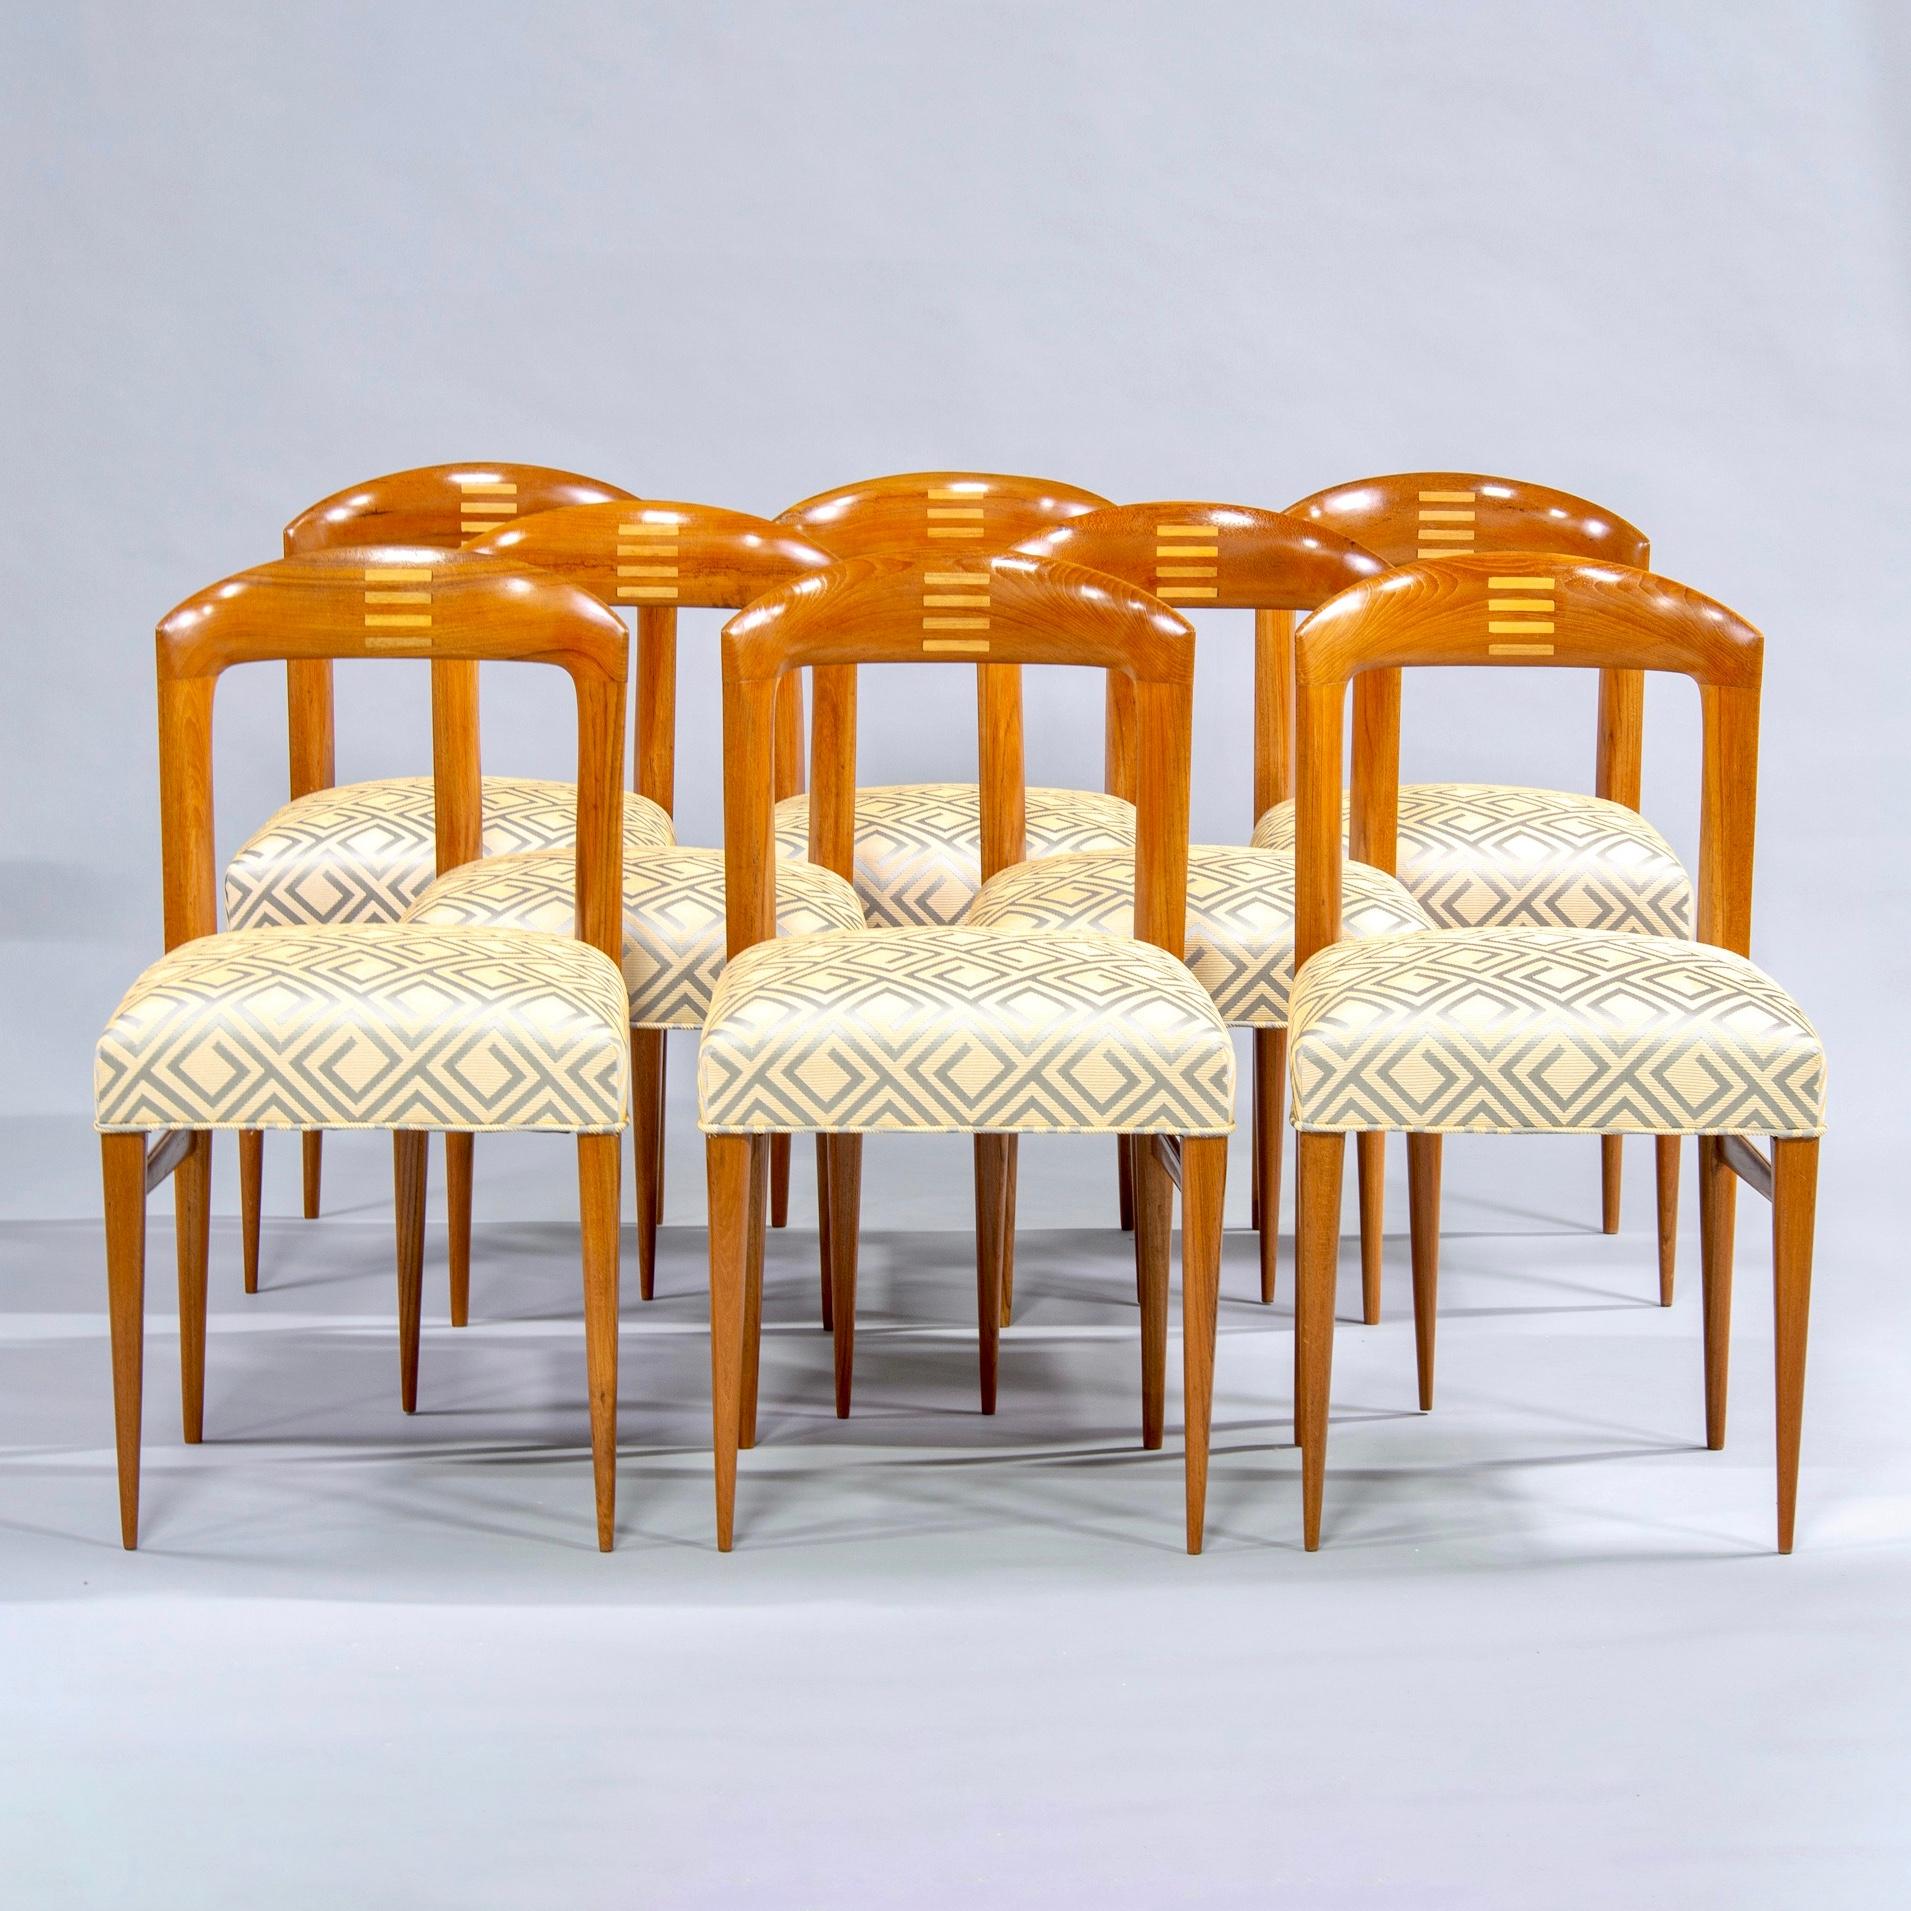 Set of eight polished Art Deco beech chairs, circa 1940. Open backs with curved tops feature inlaid design of stacked bars in contrasting blond wood. Slender, tapered legs. Professionally upholstered with new seats and designer fabric in pale gold